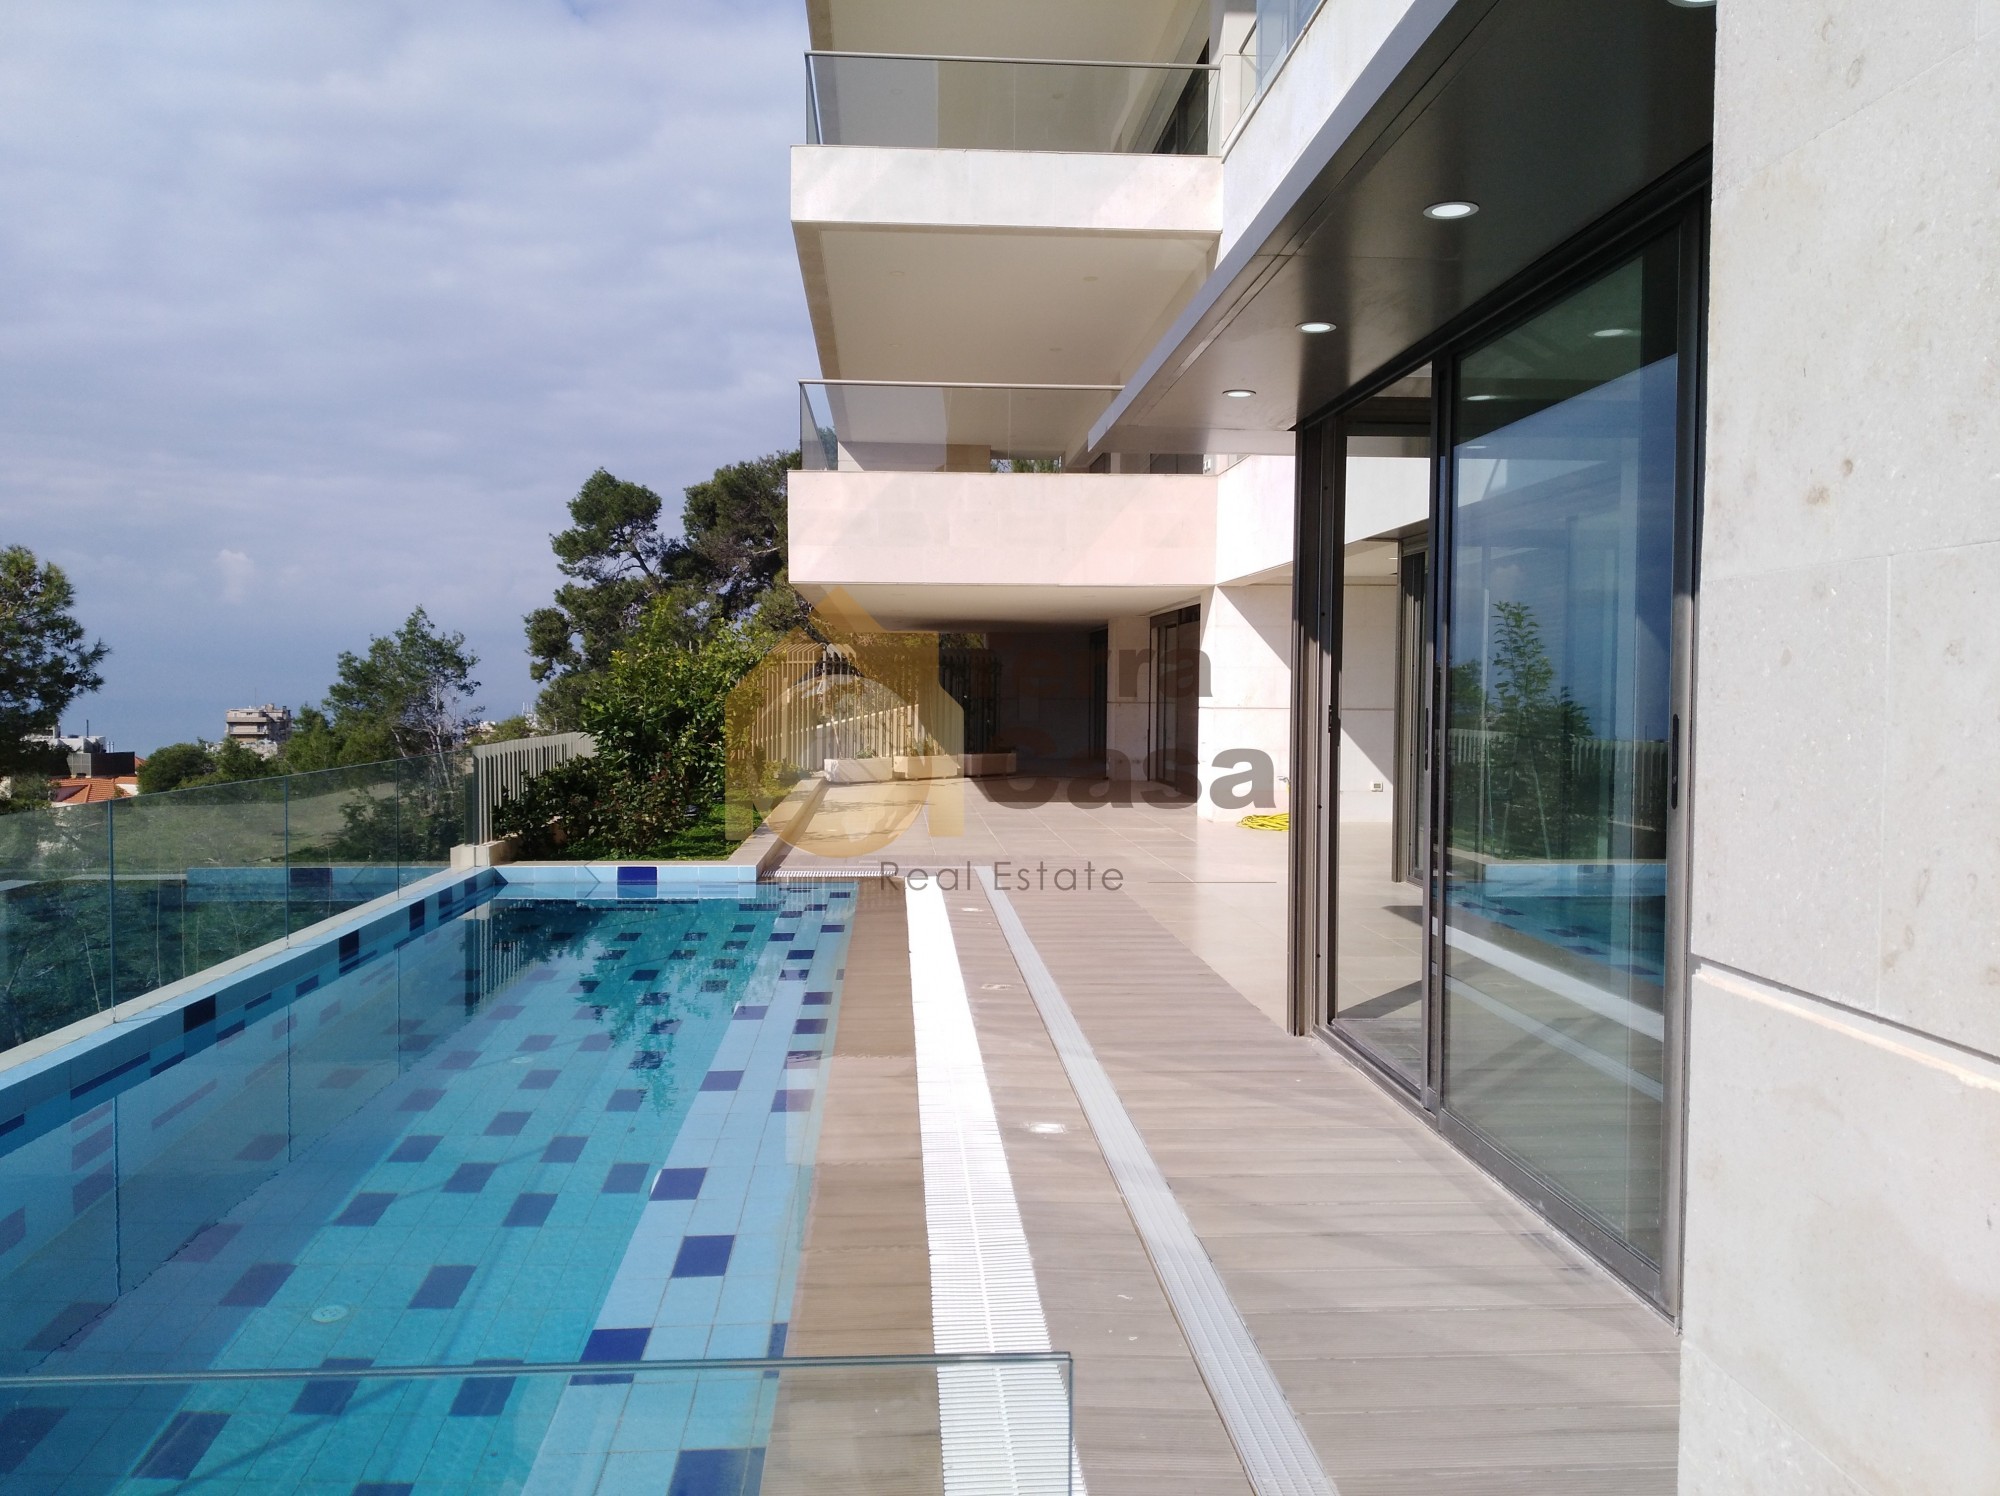 Brand new apartment for sale in Yarzeh luxurious finishing with private pool.